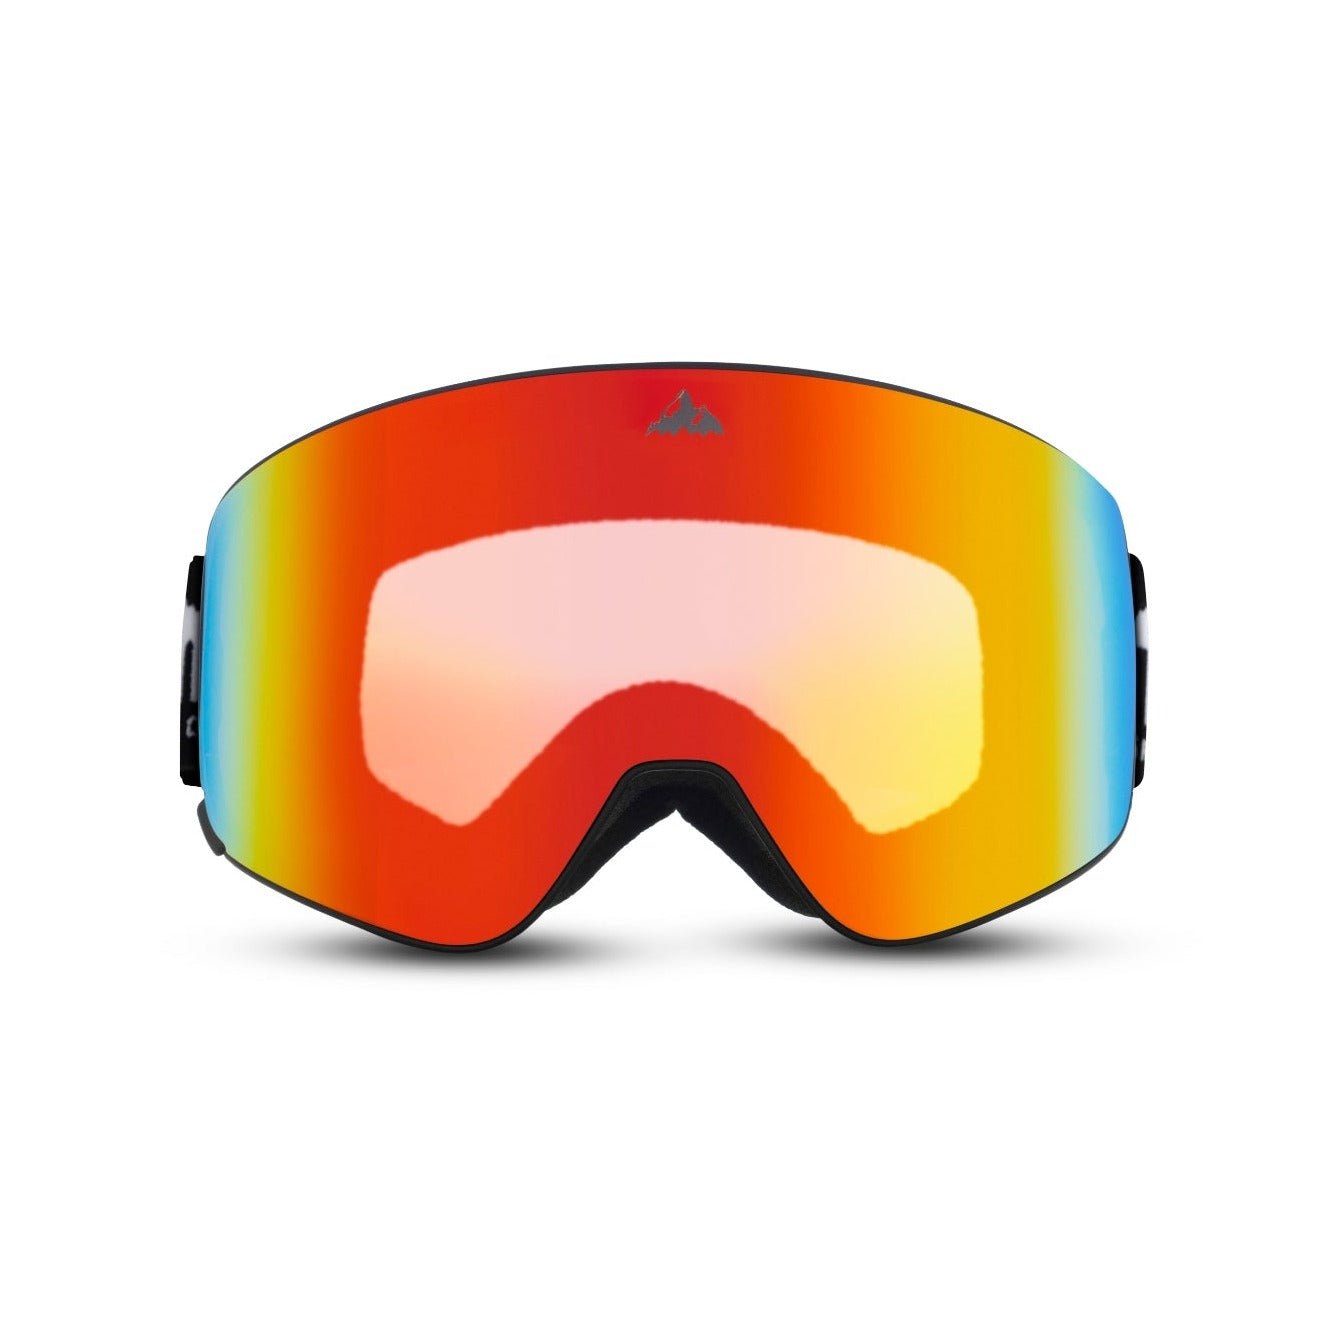 Uprising Goggles - Spare Red Lens - Teton Gravity Research